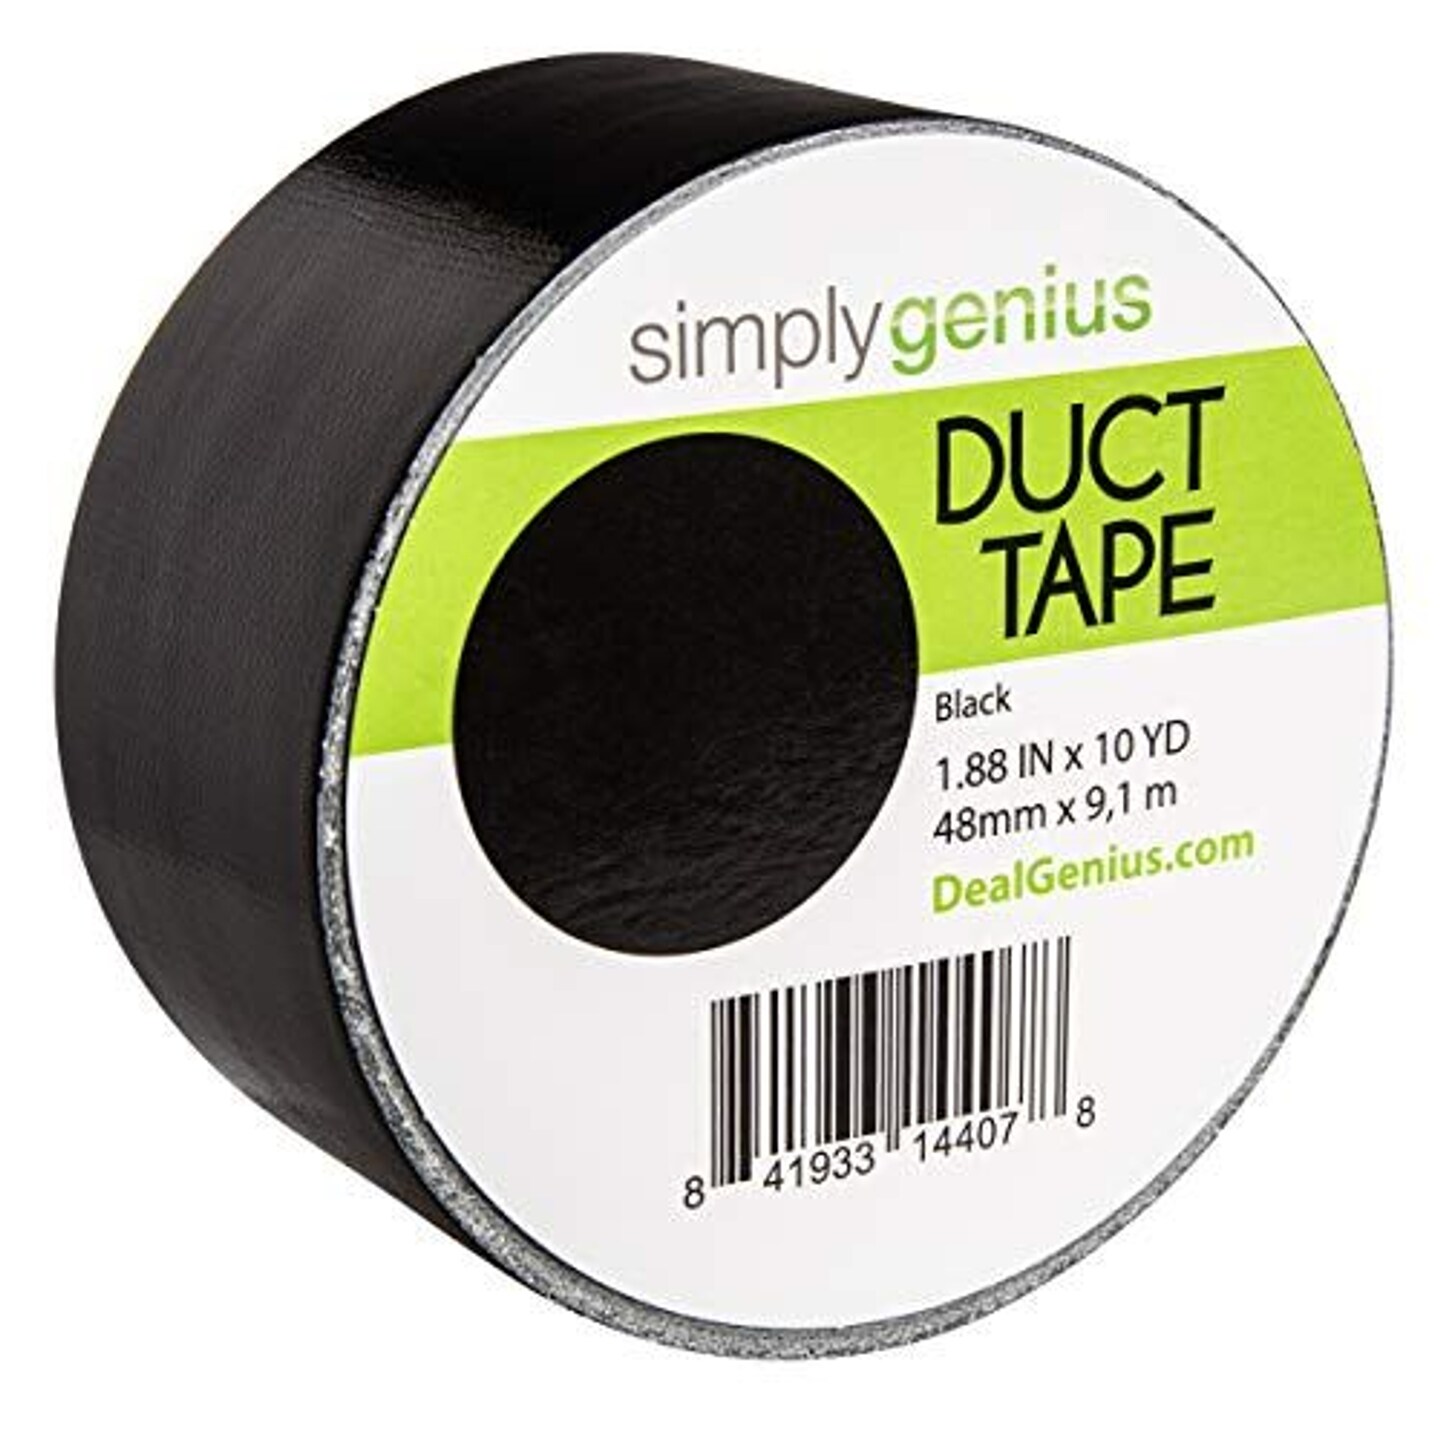 Simply Genius Art &#x26; Craft Duct Tape Heavy Duty - Craft Supplies for Kids &#x26; Adults - Colored Duct Tape - 1.8 in x 10 yards - Colorful Tape for DIY, Craft &#x26; Home Improvement (Black, Single roll)